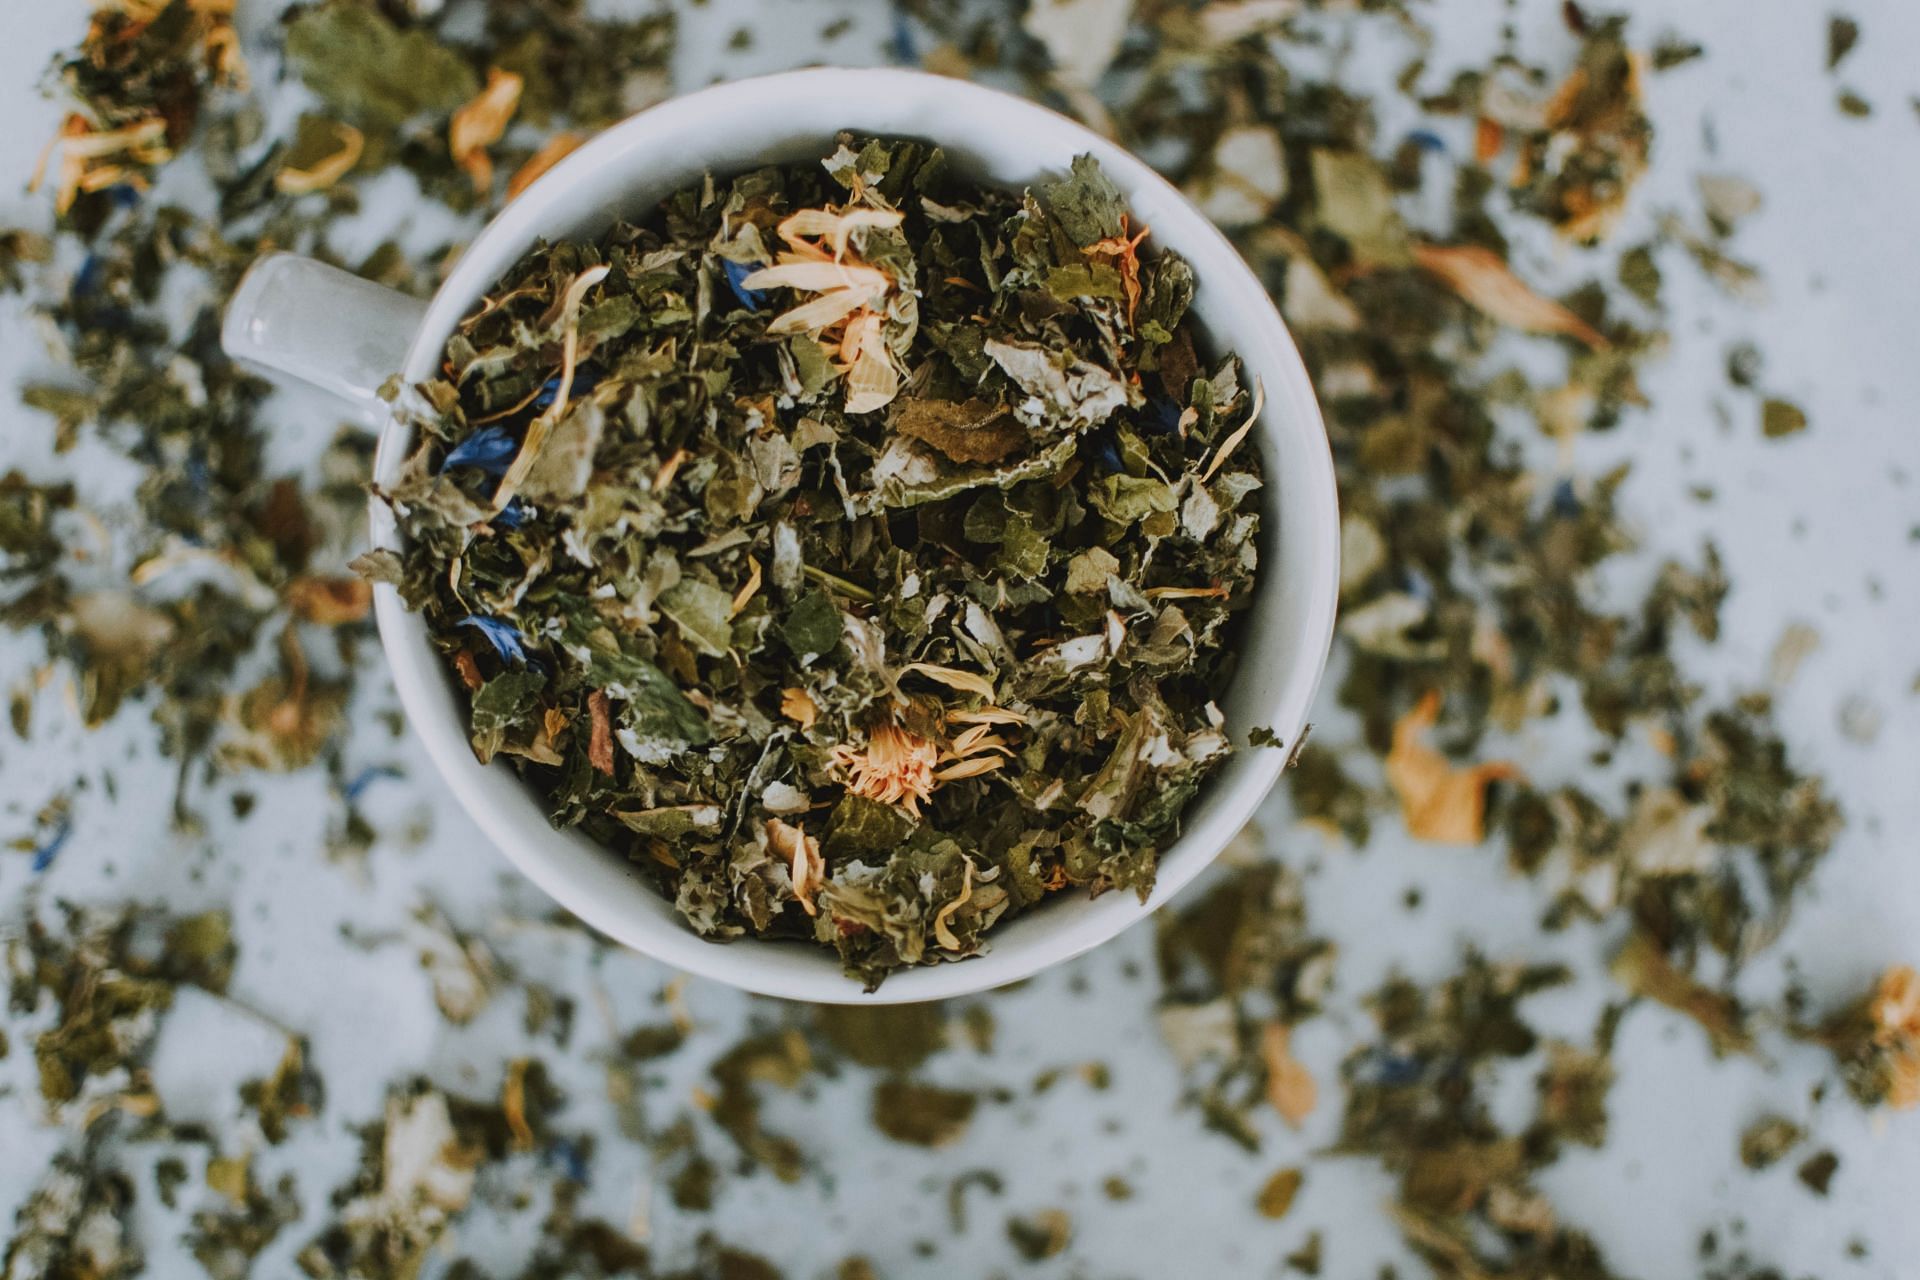 Using Ashwagandha as herbs for energy (image sourced via Pexels / Photo by Kindel Media)